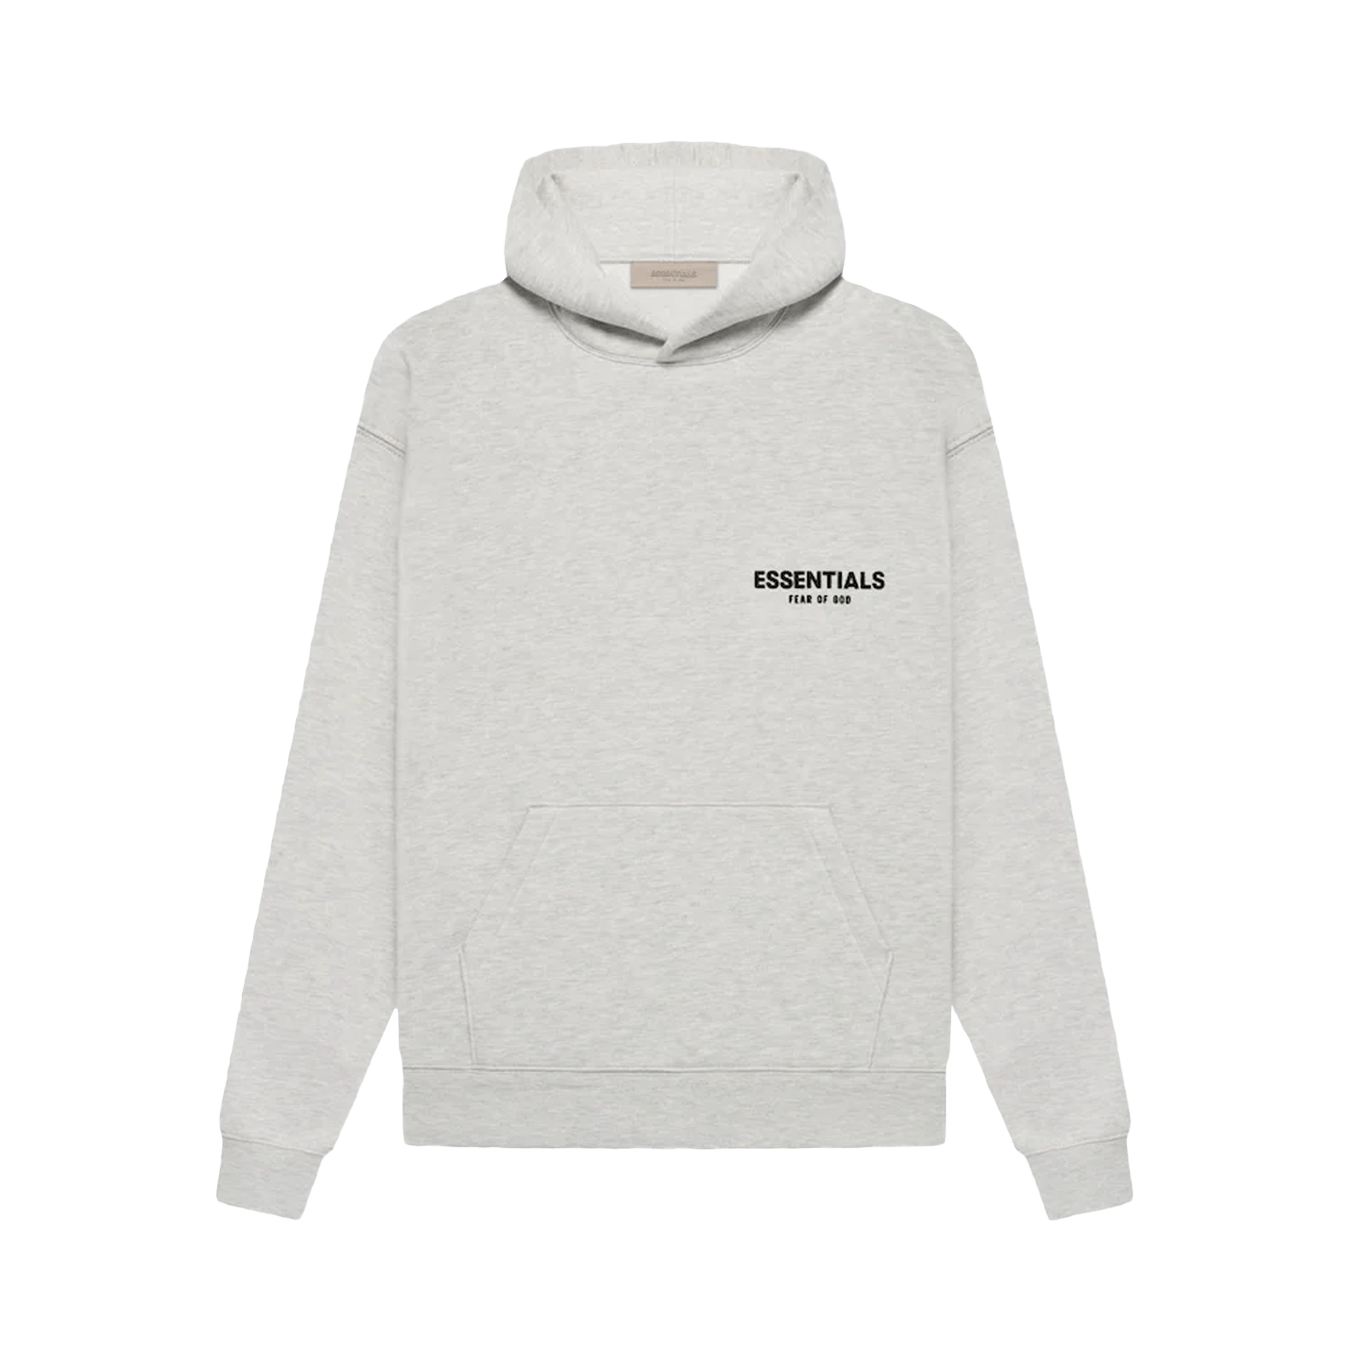 ESSENTIALS pullover oatmeal